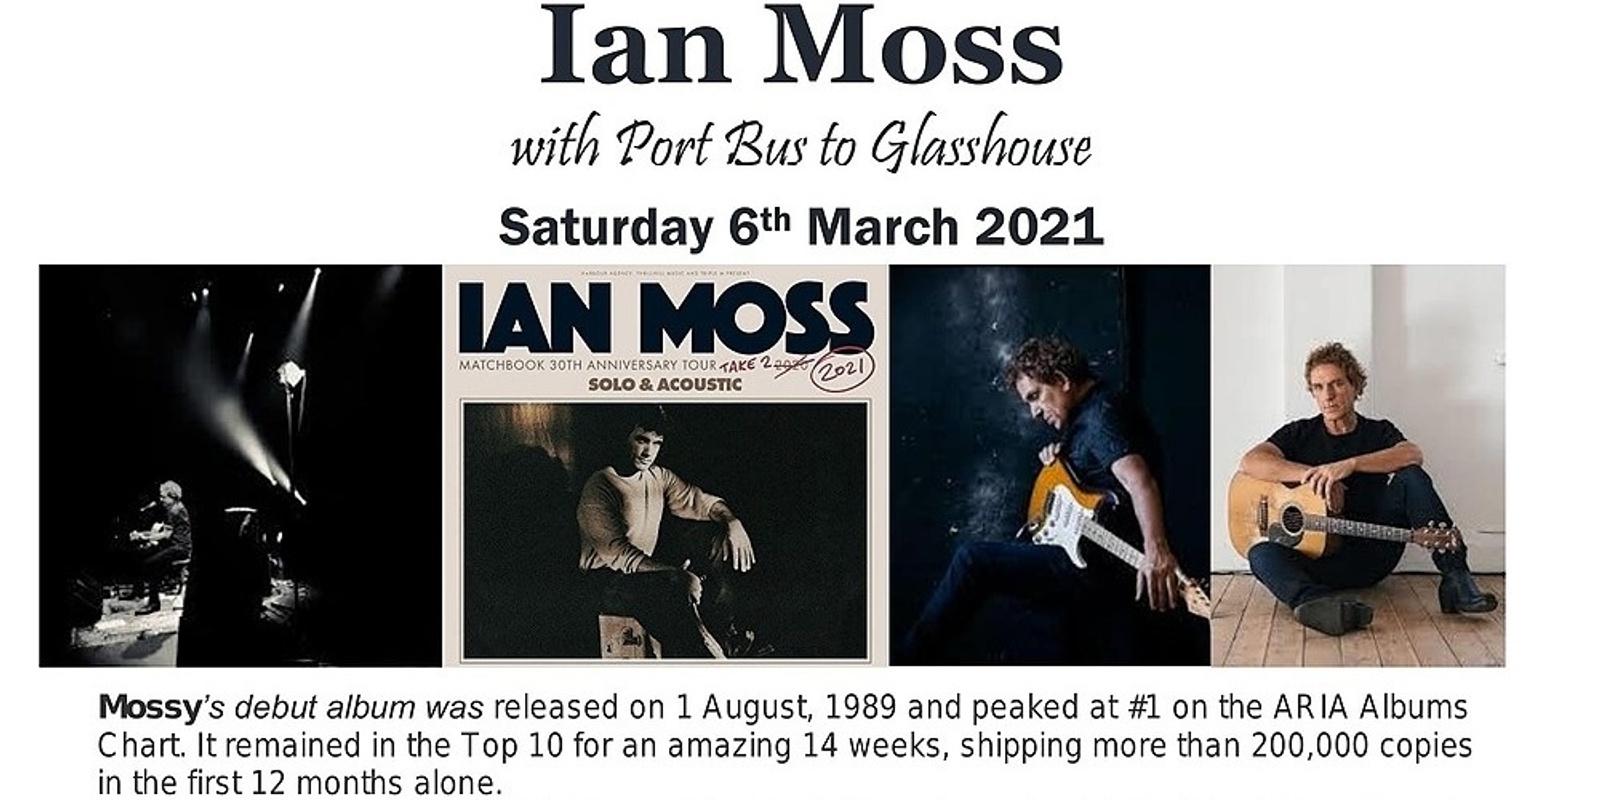 Banner image for Ian Moss with Port Bus to Glasshouse